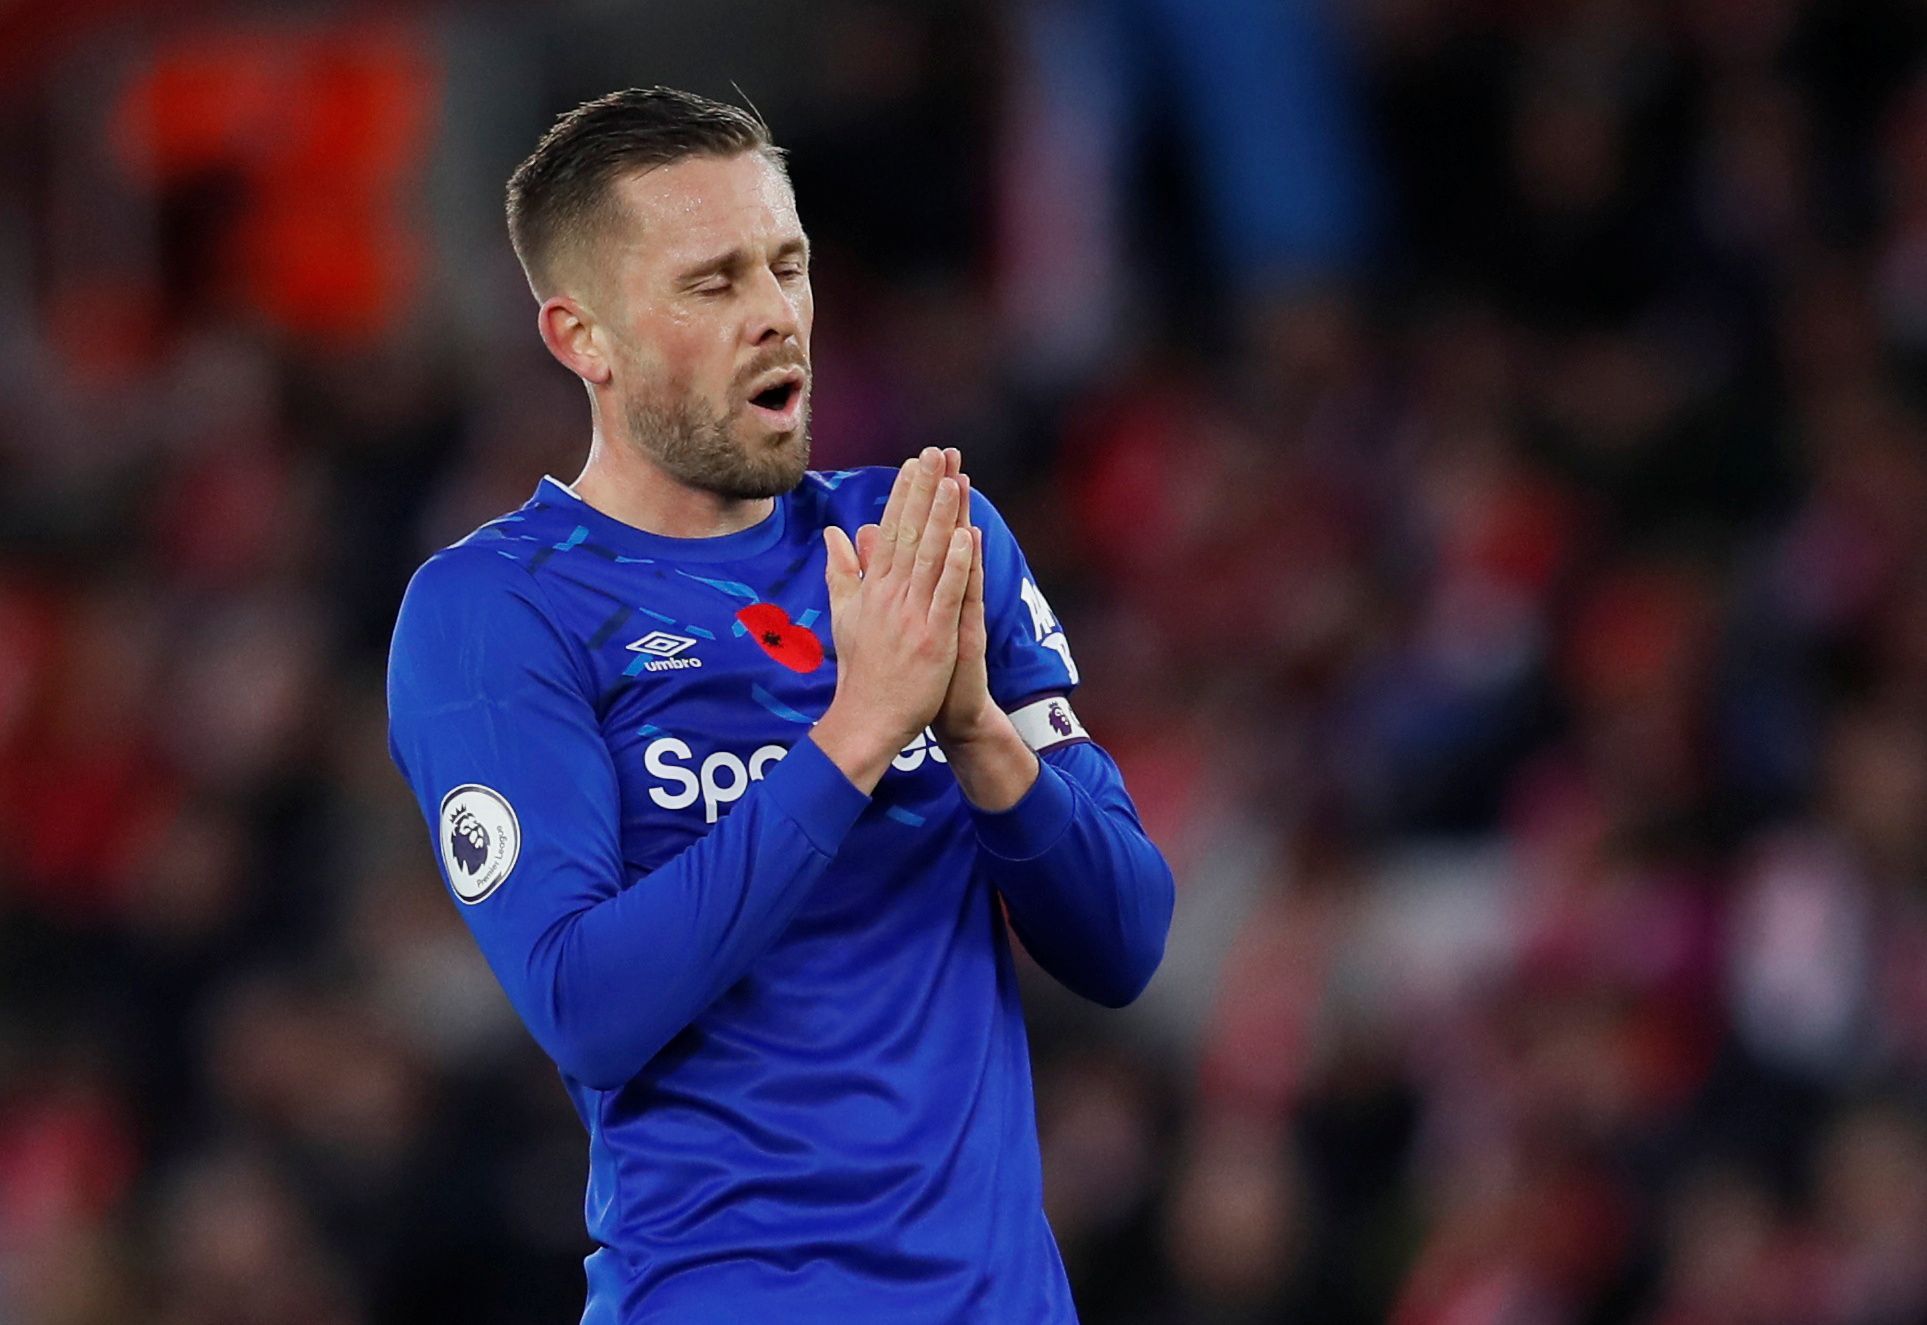 Soccer Football - Premier League - Southampton v Everton - St Mary's Stadium, Southampton, Britain - November 9, 2019  Everton's Gylfi Sigurdsson reacts            REUTERS/David Klein  EDITORIAL USE ONLY. No use with unauthorized audio, video, data, fixture lists, club/league logos or "live" services. Online in-match use limited to 75 images, no video emulation. No use in betting, games or single club/league/player publications.  Please contact your account representative for further details.